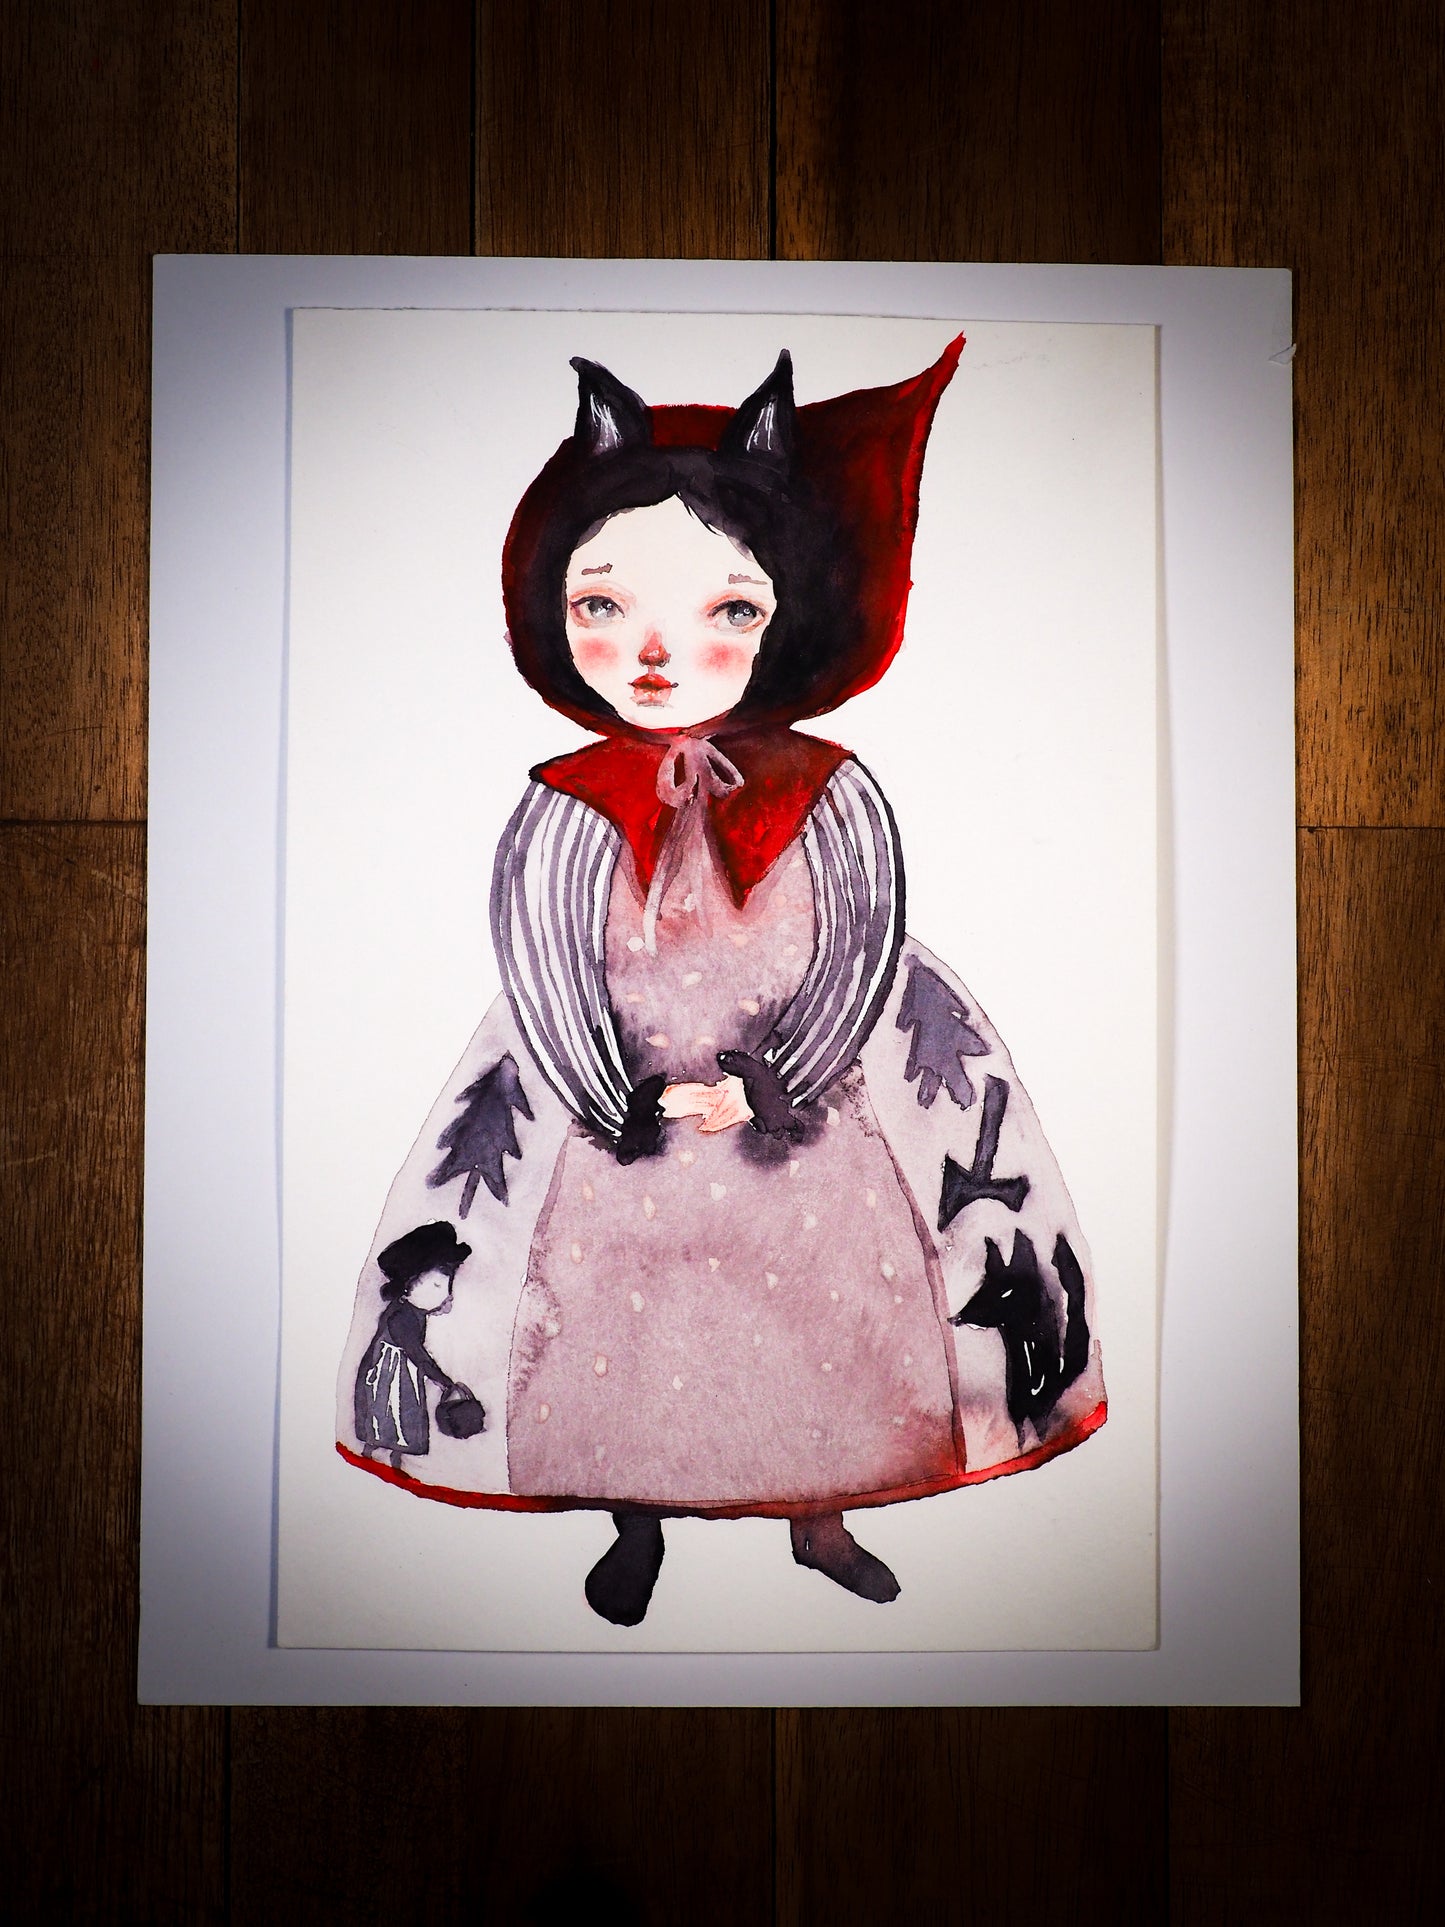 An original mixed media watercolor by Idania Salcido, the artist behind Danita Art.  This is a beautiful mixed media painting, iNapier’s by the story of Lit le Red Riding Hood. Painted with watercolors over watercolor paper.